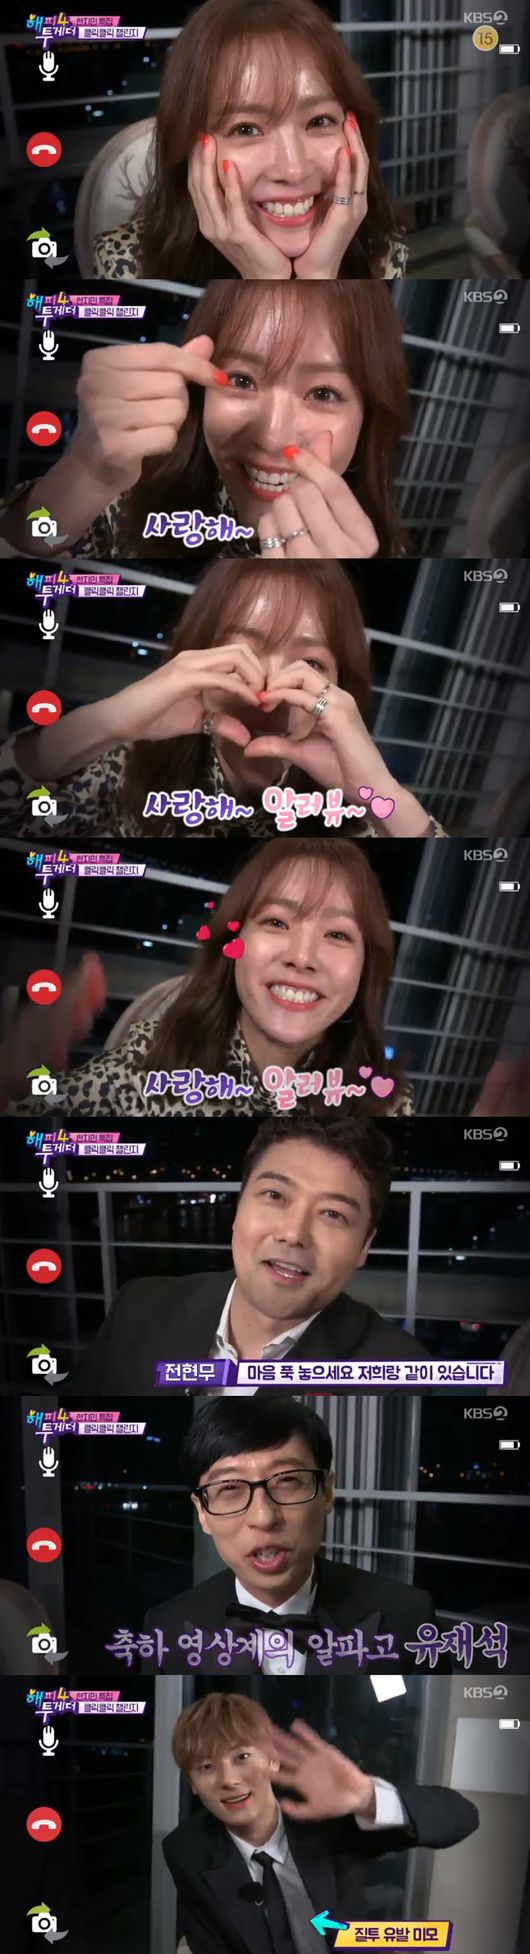 <p>Han Ji-min is one of the best actors in the world. Hwang Min-hyun, Wanna One, starred in Special MC Gye Sang-ryul in KBS 2TV Entertainment Happy Together 4 As a guest, Han Ji-min appeared and exploded an unusual act and a sense of hiding.</p><p>MC headed to Busan to meet Han Ji-min. Han Ji-min said, This is the first time I have a PIFF. I wanted to bring my work to the festival, but it is important to see society.</p><p>Han Ji-min is a Wannabeul rumor, Minhyuns makeup teacher was with me, and my brother was a fan of Wanna One, so I wanted to accept his autograph too. He said.</p><p>On this day, Hwang Minhyun gave a sweet song to Han Ji-min, saying that he had prepared a present. Ji-min said, Its the first time someone calls me this way, Im so embarrassed.</p><p>Han Ji-min special feature. Good question bad question strange question corner.</p><p>Han Ji-min, the ambassador of Han Ji-min, said, I am happy with the injection, but I have had a difficult time in the past, and I was drinking and crying. I heard that story, and I cried more. </p><p>I wanted to have a man like that because it appeared when the drama Dokkaebi was aired. As for Gong Yoo, I shot the movie Jungjeong, and I and Gong Yoo are like Tom and Jerry.</p><p>I asked Han Ji-min, Kimi goddess, about the best actor. Han Ji-min replied, I think my partners blessing was good. My eyes are so beautiful, but my heart is clear, but what I admire most is that I do my best as an actor, but as my dad, I do my best as a husband, and I thought I wanted to have such a family.</p><p>Han Ji-min, who debuted 15 years ago, said, I appeared as a child of Song Hye Kyo when I was in All In. I went on a trip because I did not feel like auditioning, but after I had not cast yet, I auditioned again. .</p><p>Park Hyung-sik, who is the acquaintance of Han Ji-min and Yen of Hyeri and Bigs, showed off Jimmins complaints. Han Ji-min is a solver. Han Ji-min is a black knight. Park Hyung-sik commented on Han Ji-min, The first impression was stunning and I was really surprised by the warmth and goodness.</p><p>Last corner Click-click Challenge, Han Ji-min is the corner where Donation can be done. Donation is possible if a star creates your own content and the number of views exceeds one million views. Han Ji-min asked, Where do you want to donate? I filmed a movie about child abuse, but I do not have enough childrens protection agencies in my country. I want to donate to a child protection center.</p><p>Han Ji-min has left a video that seems to talk to his boyfriend and girlfriend who are in fashion these days. It was not Han Ji-min, but a brilliant figure.</p>